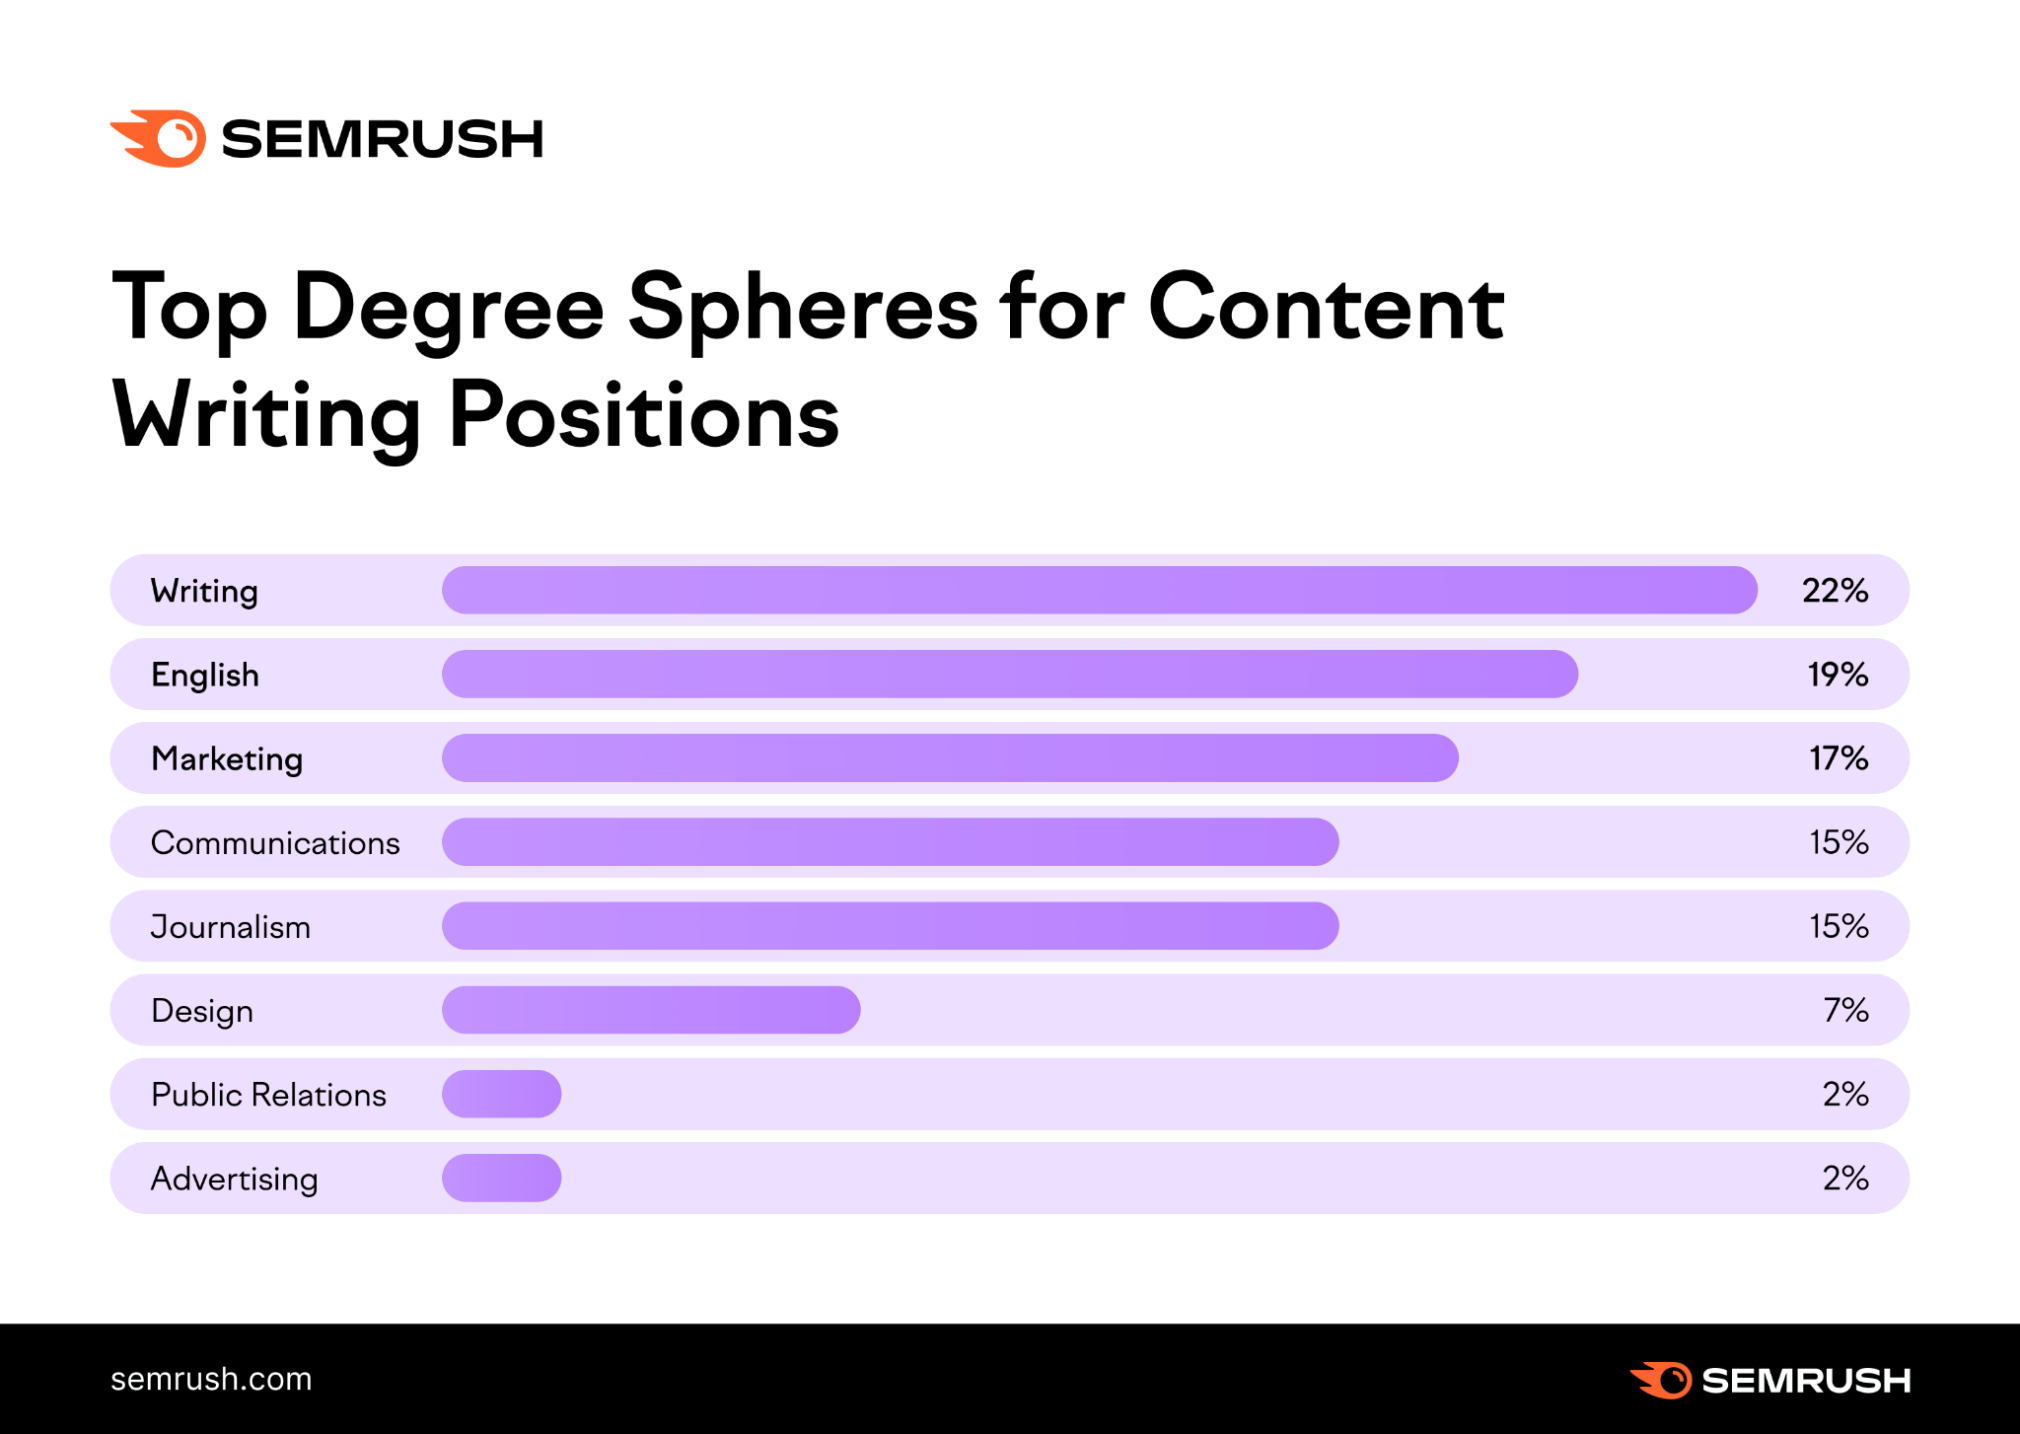 Higher degree domains for content writers